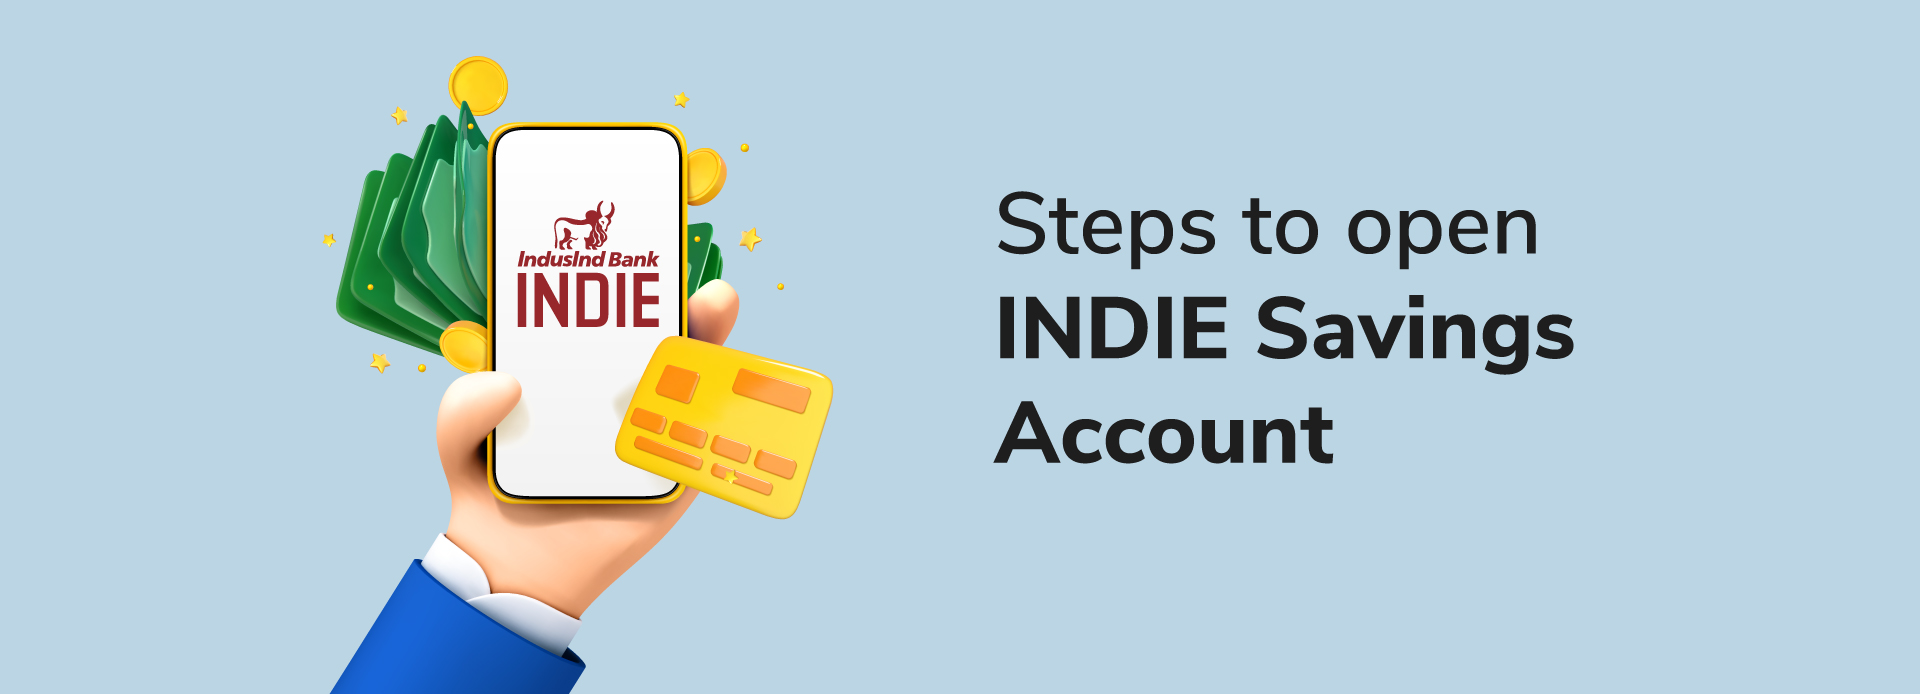 How to easily open a savings account online with INDIE